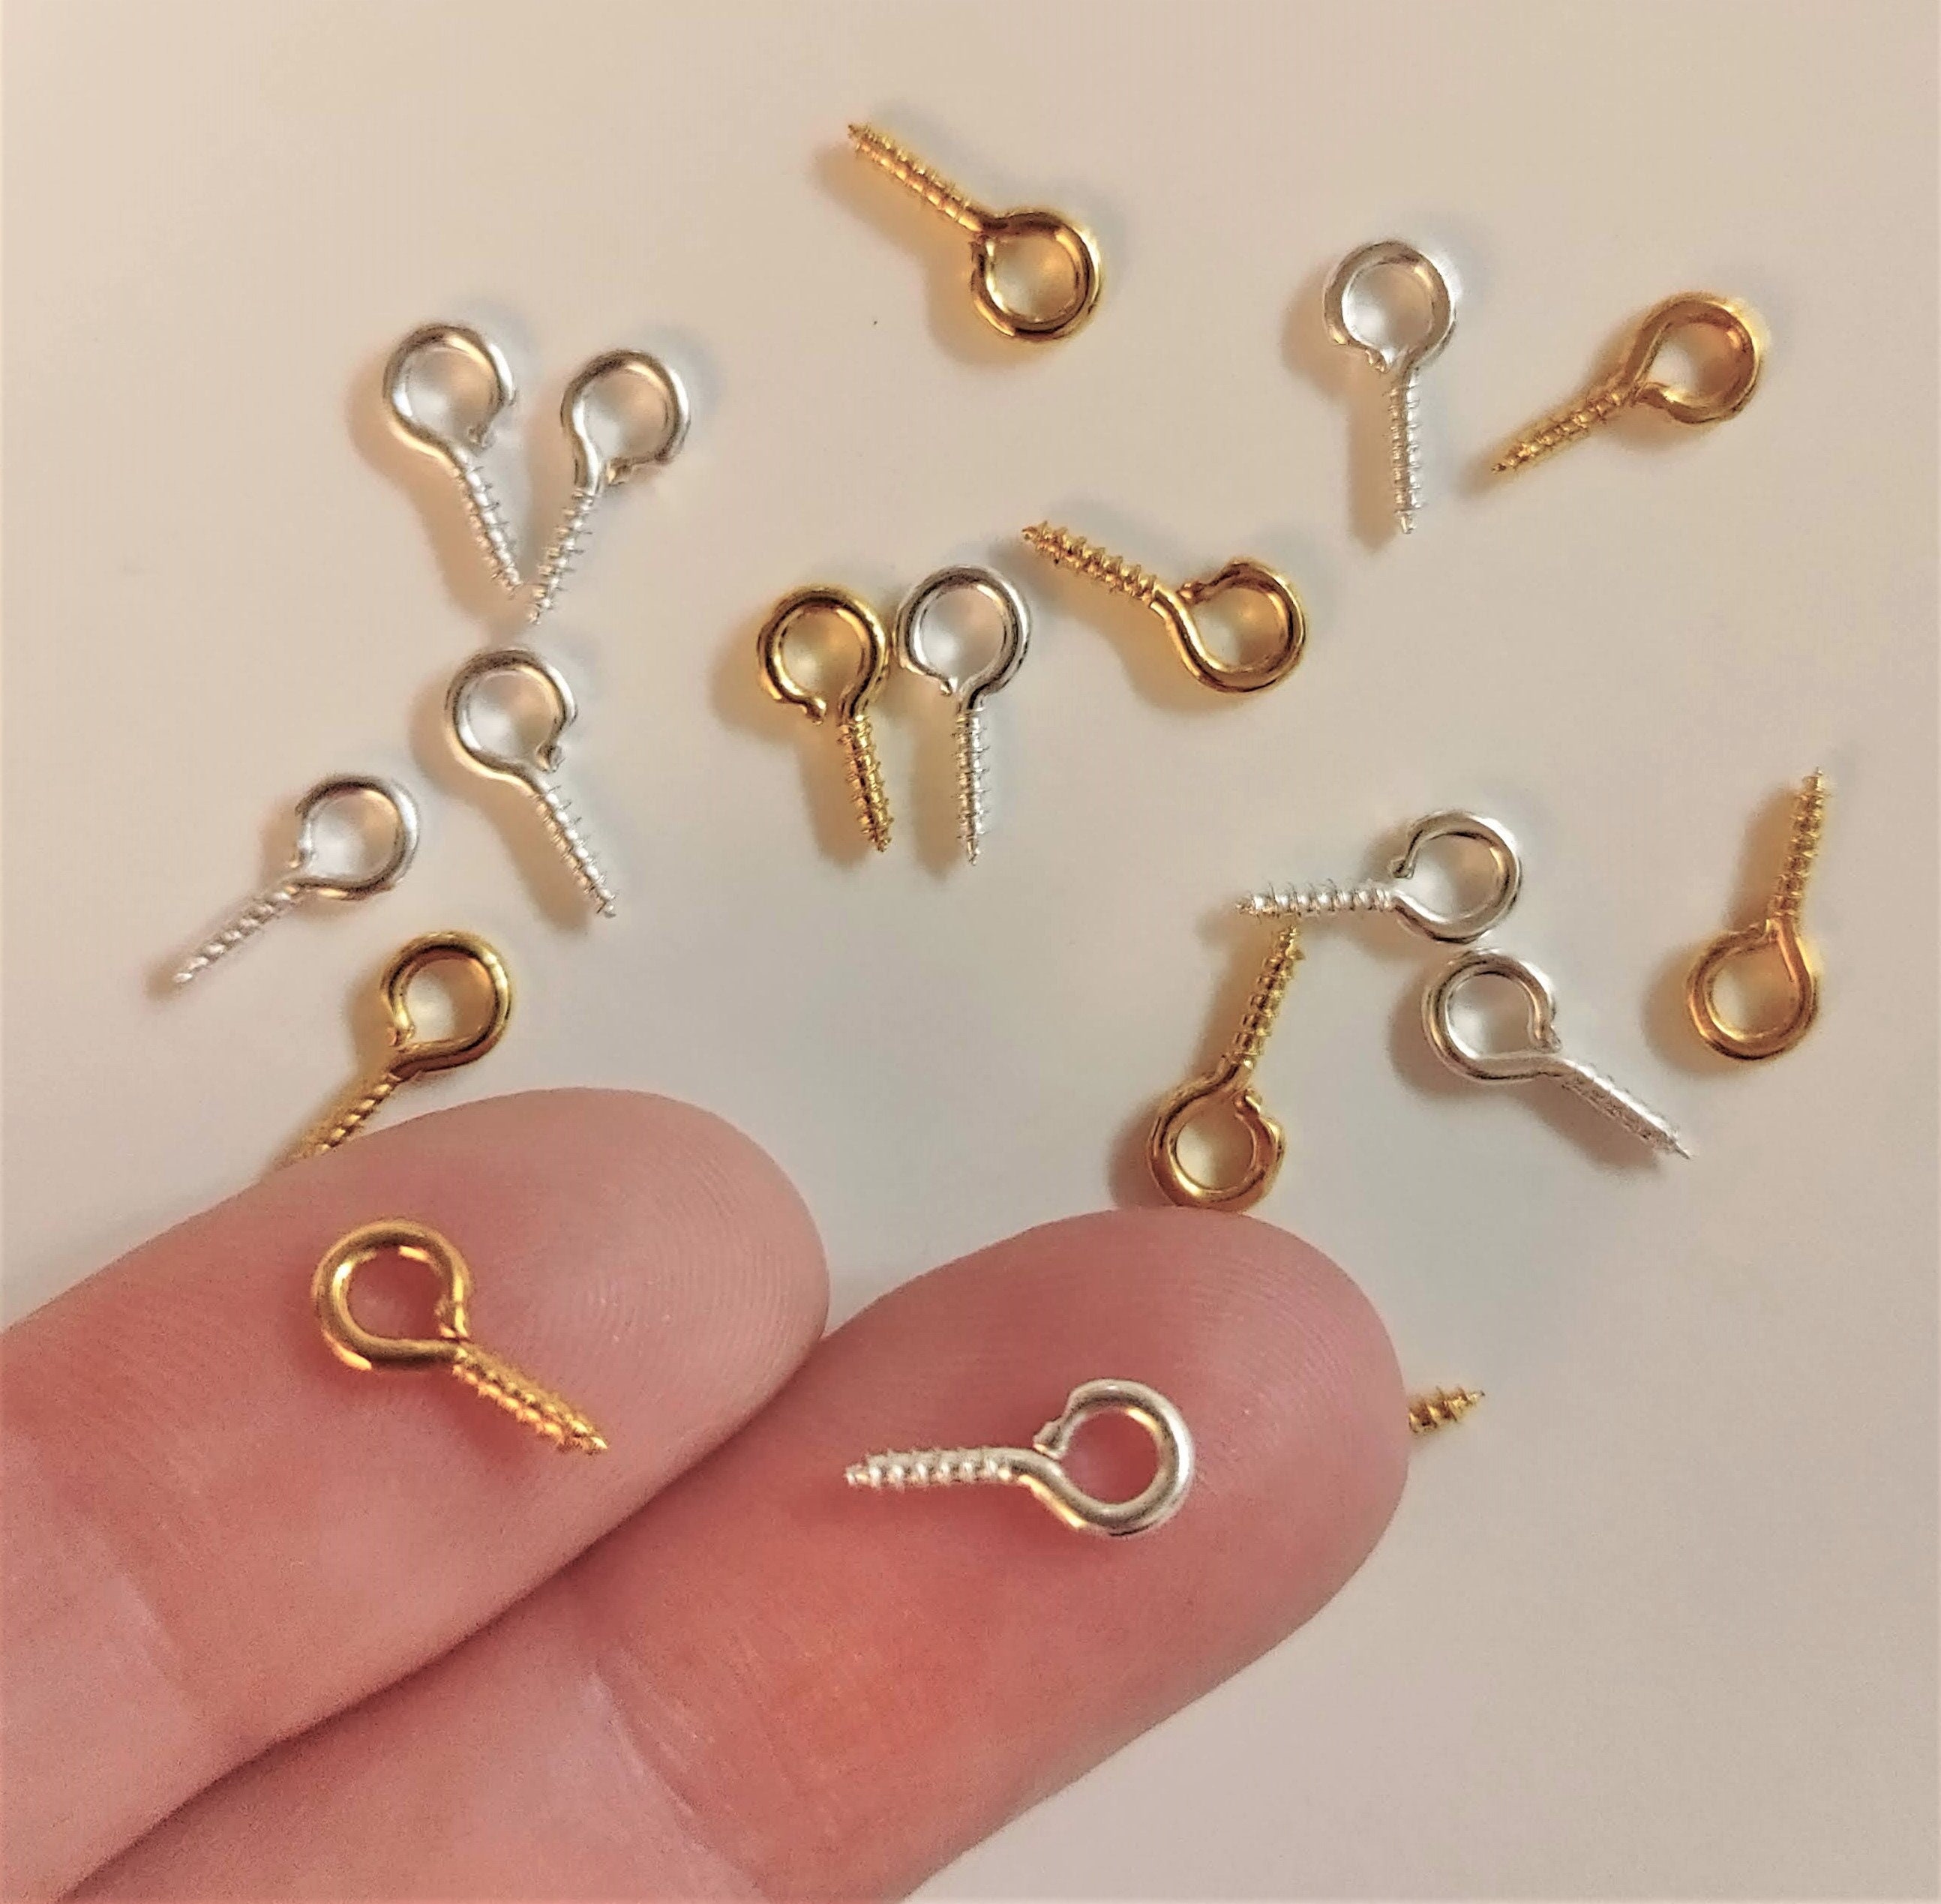 Golden Stainless steel Screw Eyepins 8x4 mm-perfect for create